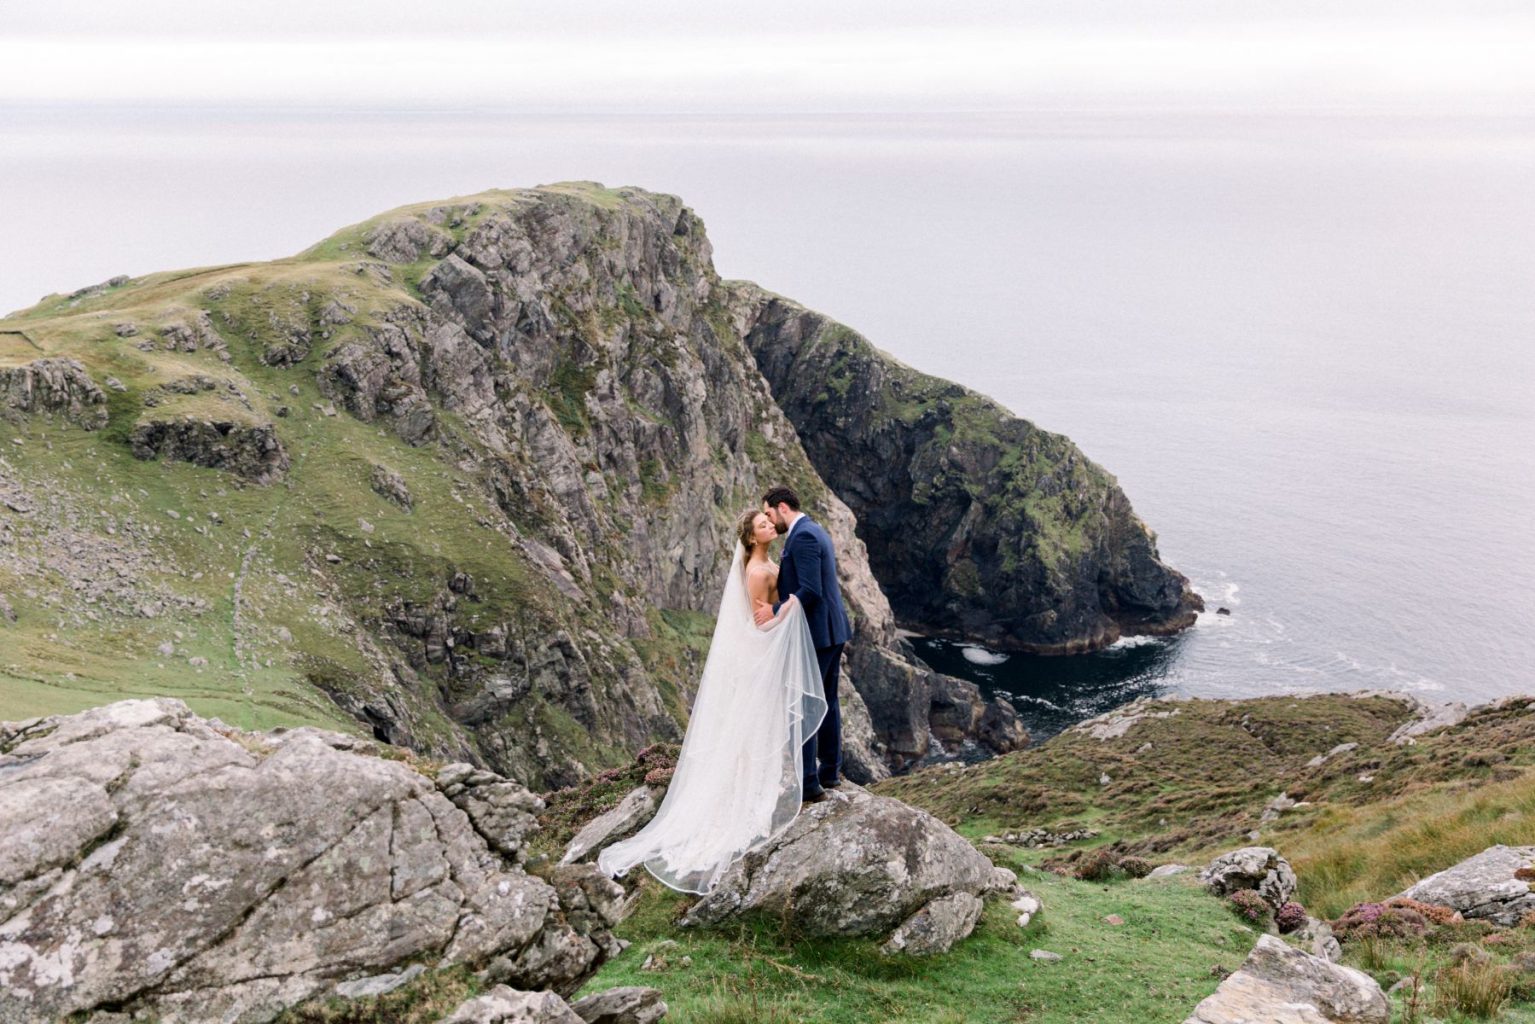 Bride and Groom embracing overlooking the sea.